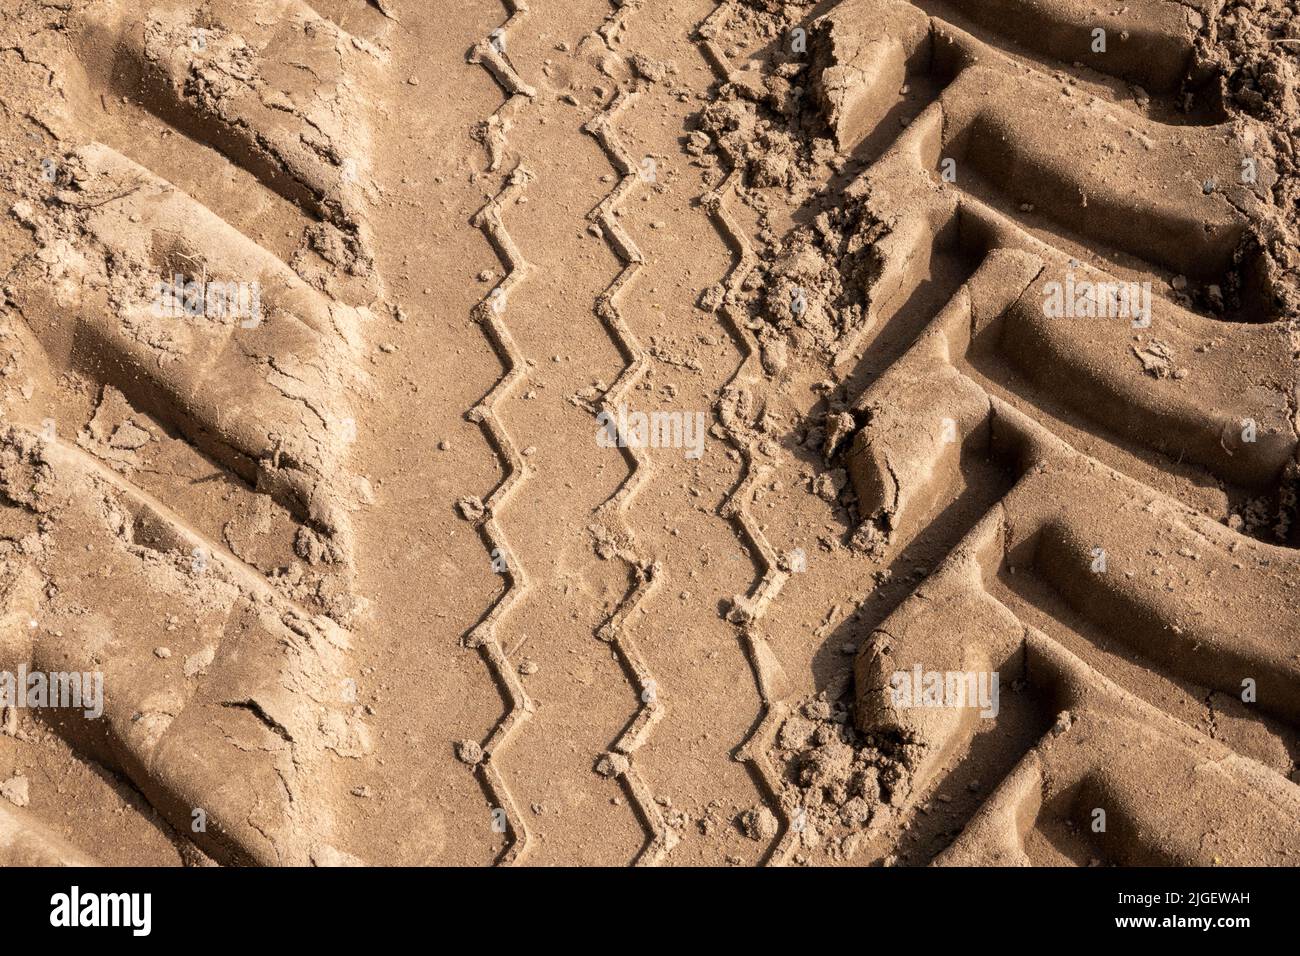 Heavy tractor tyre tracks in soft sand with deep ridges Stock Photo